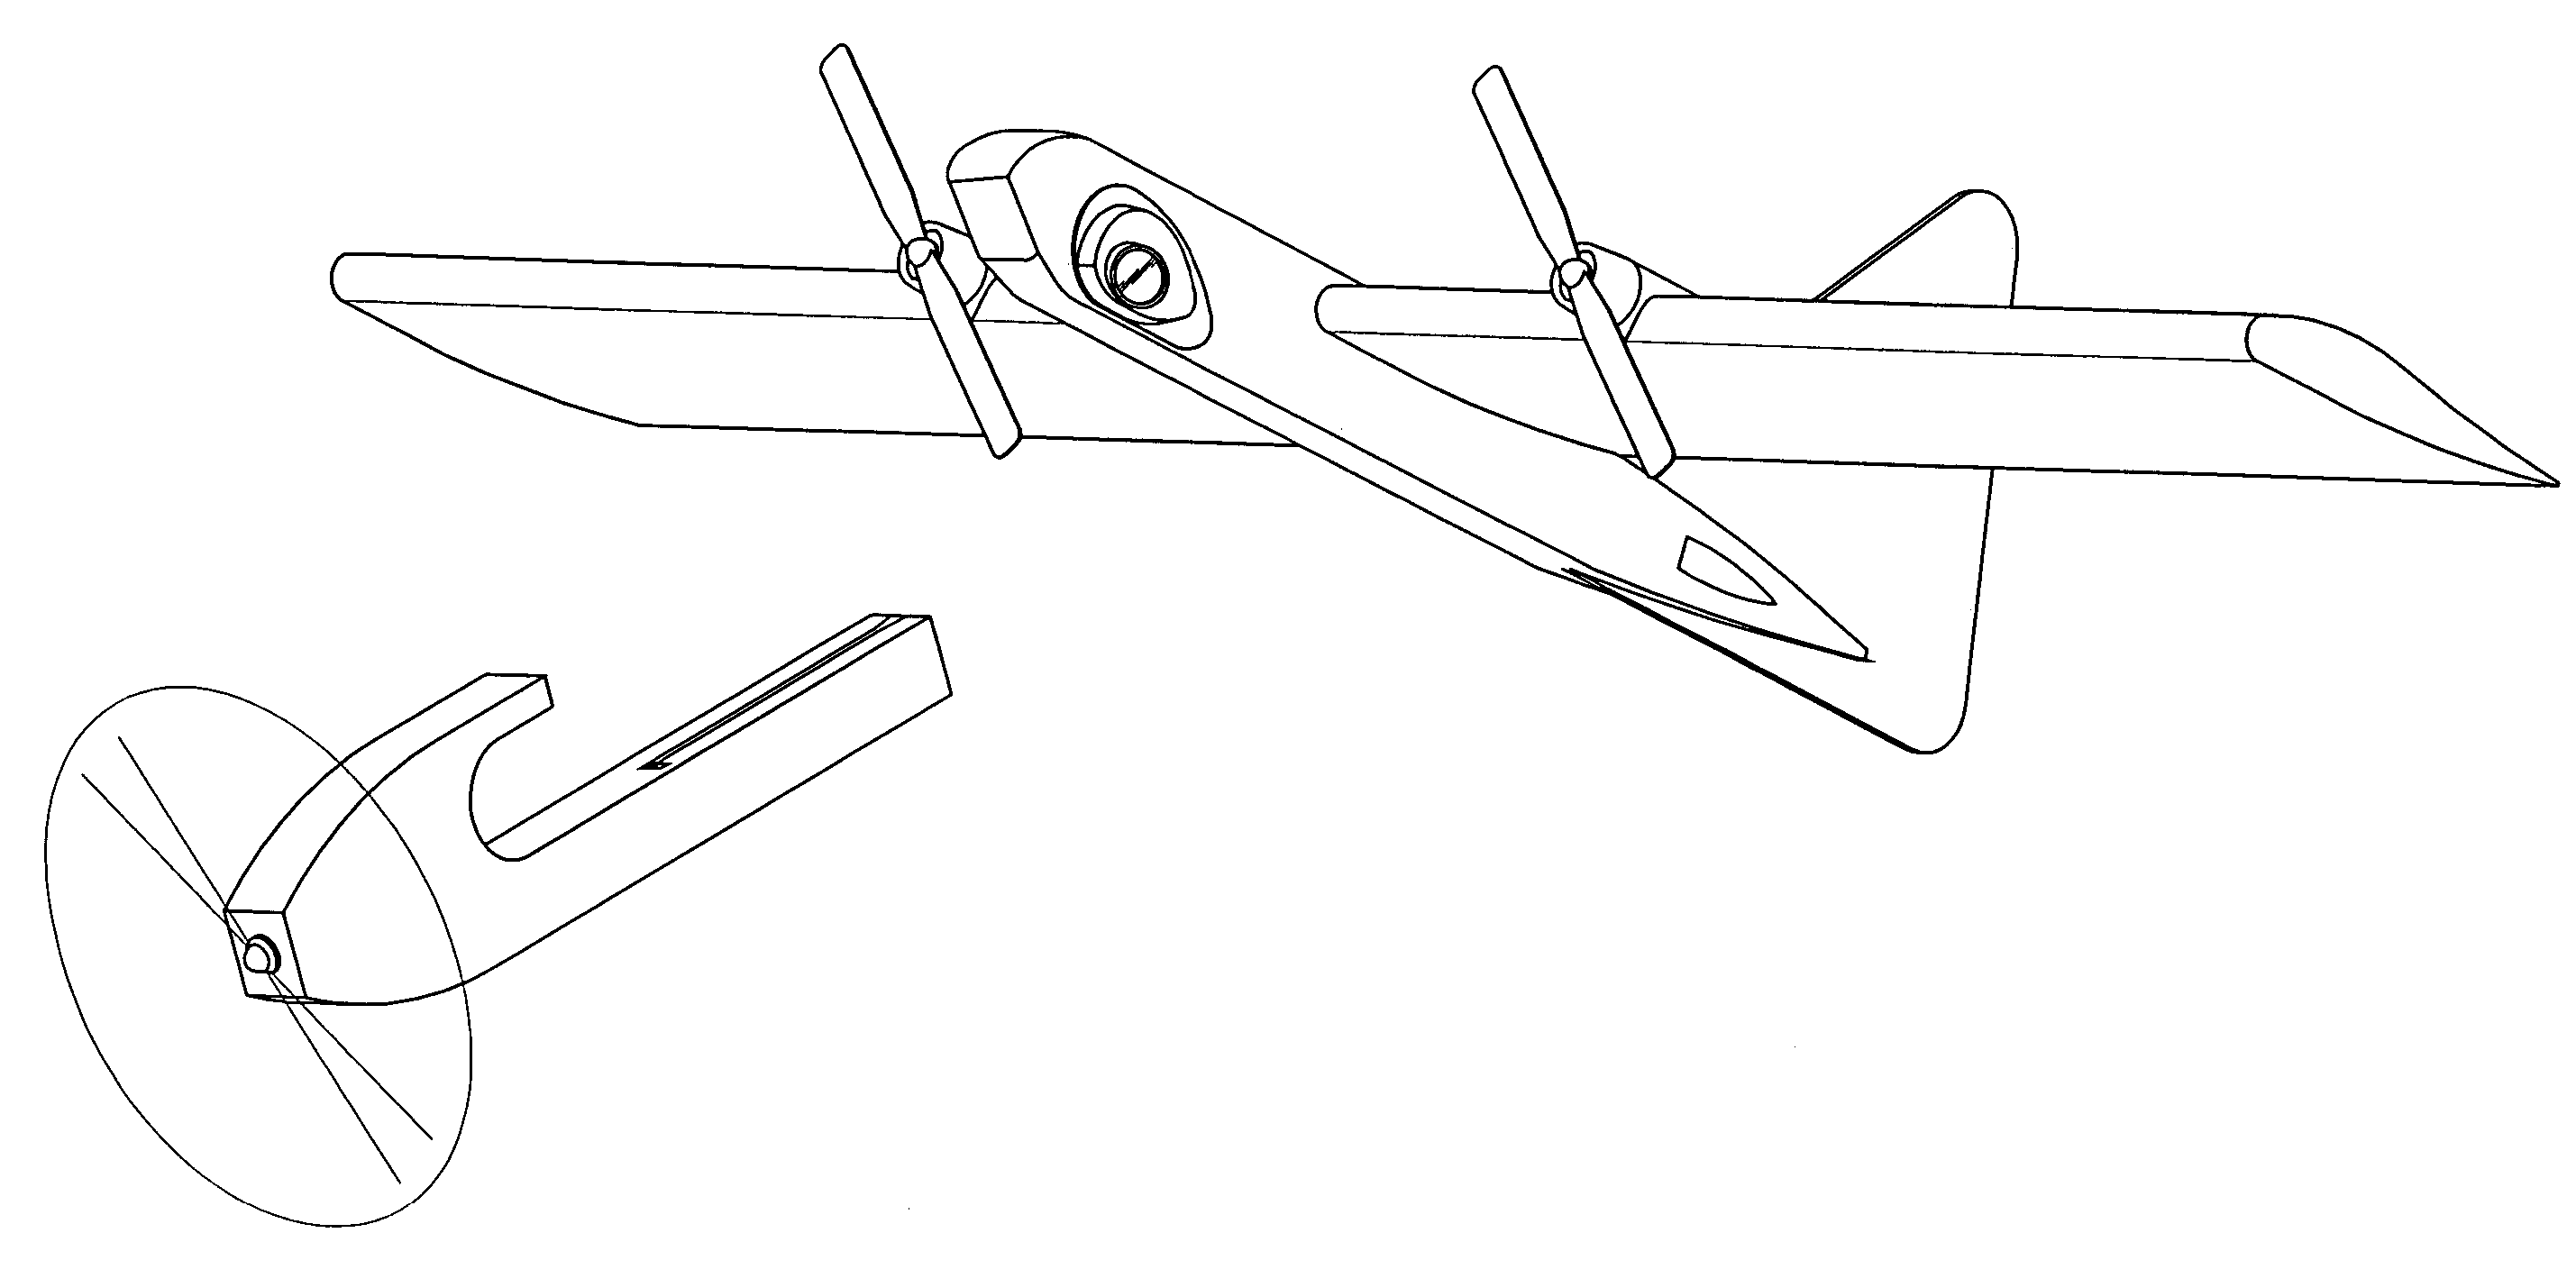 Electric motor assisted takeoff device for an air vehicle